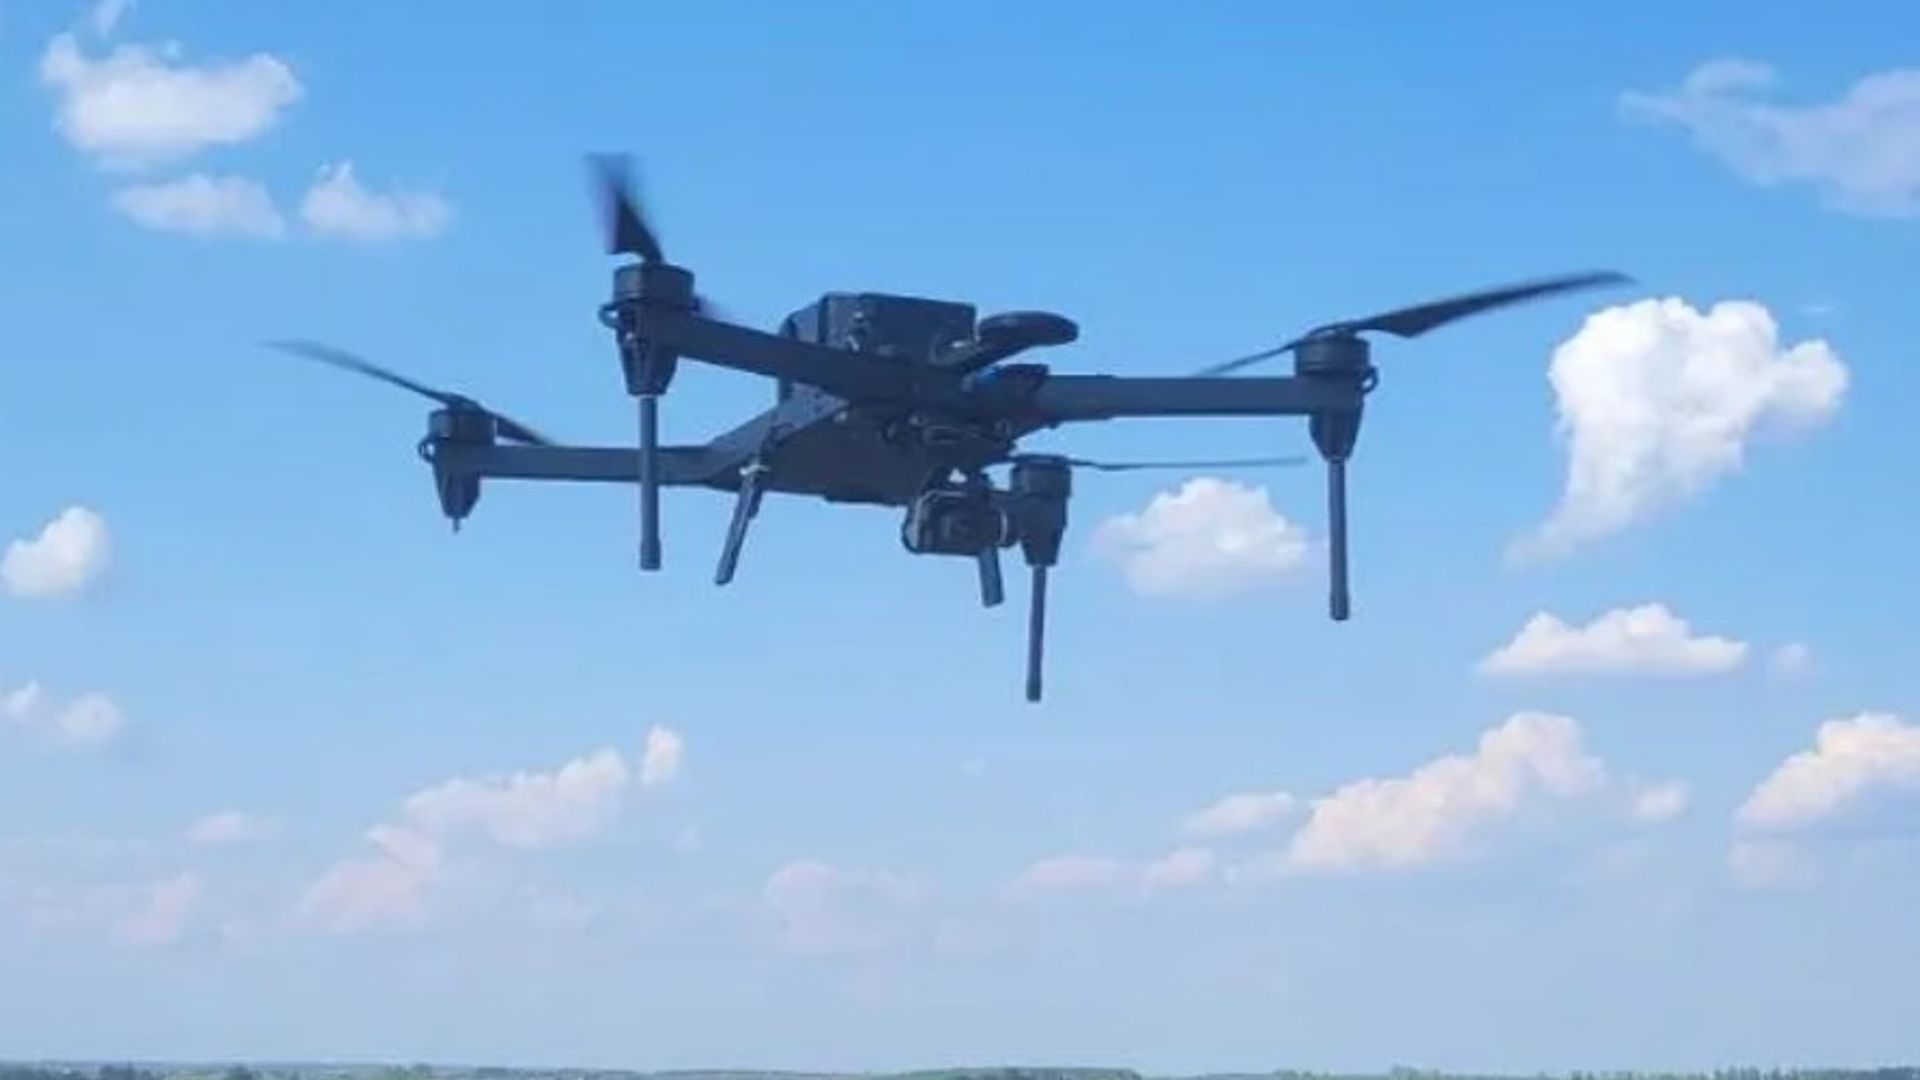 AI drones in Ukraine are carrying out autonomous strikes on Russian forces. It's the first confirmed instance of such technology being used.